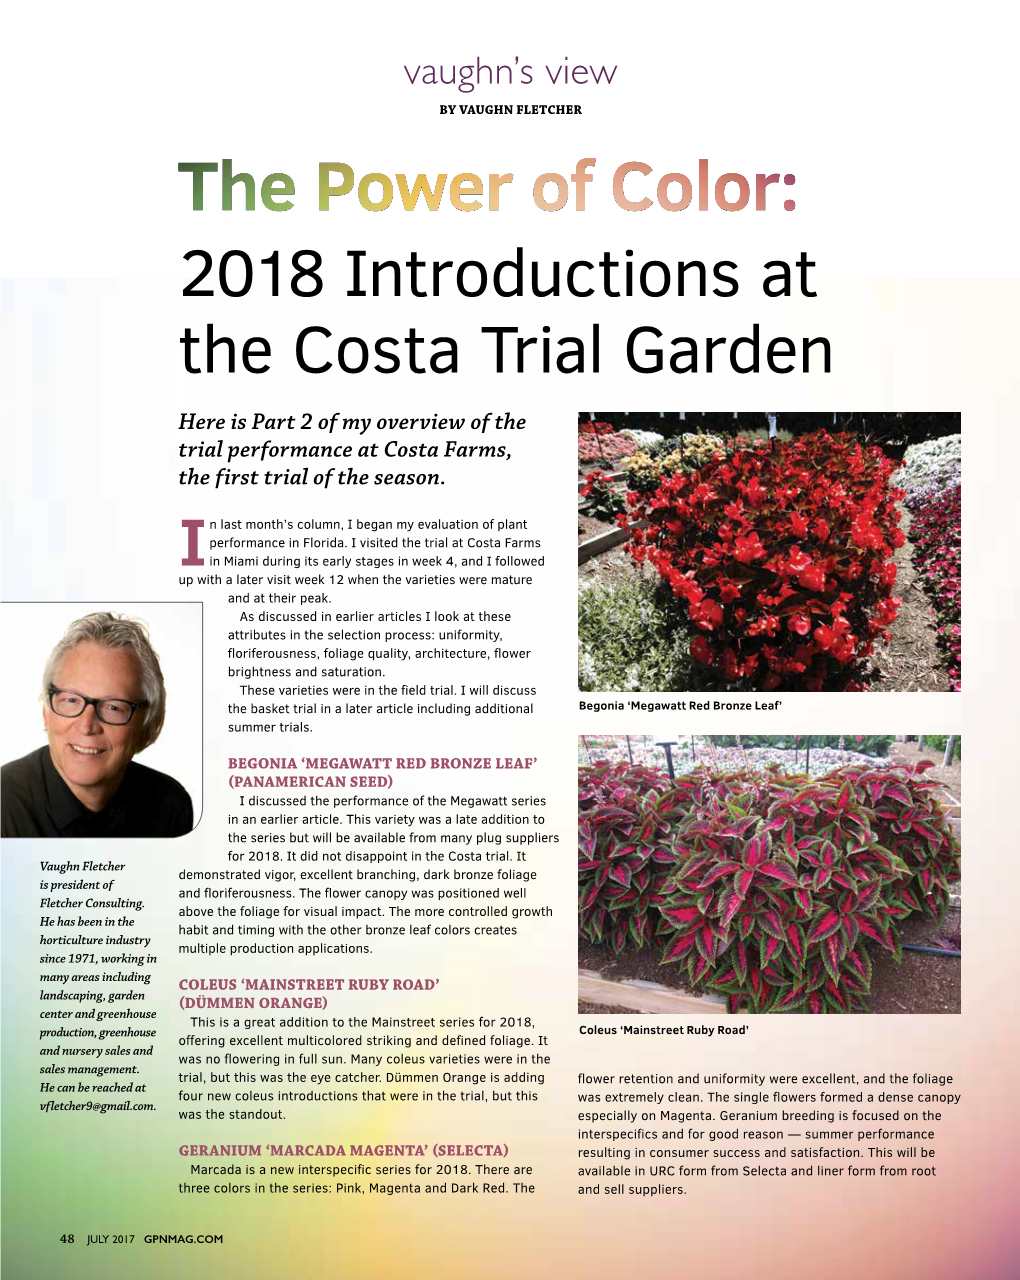 2018 Introductions at the Costa Trial Garden Here Is Part 2 of My Overview of the Trial Performance at Costa Farms, the First Trial of the Season